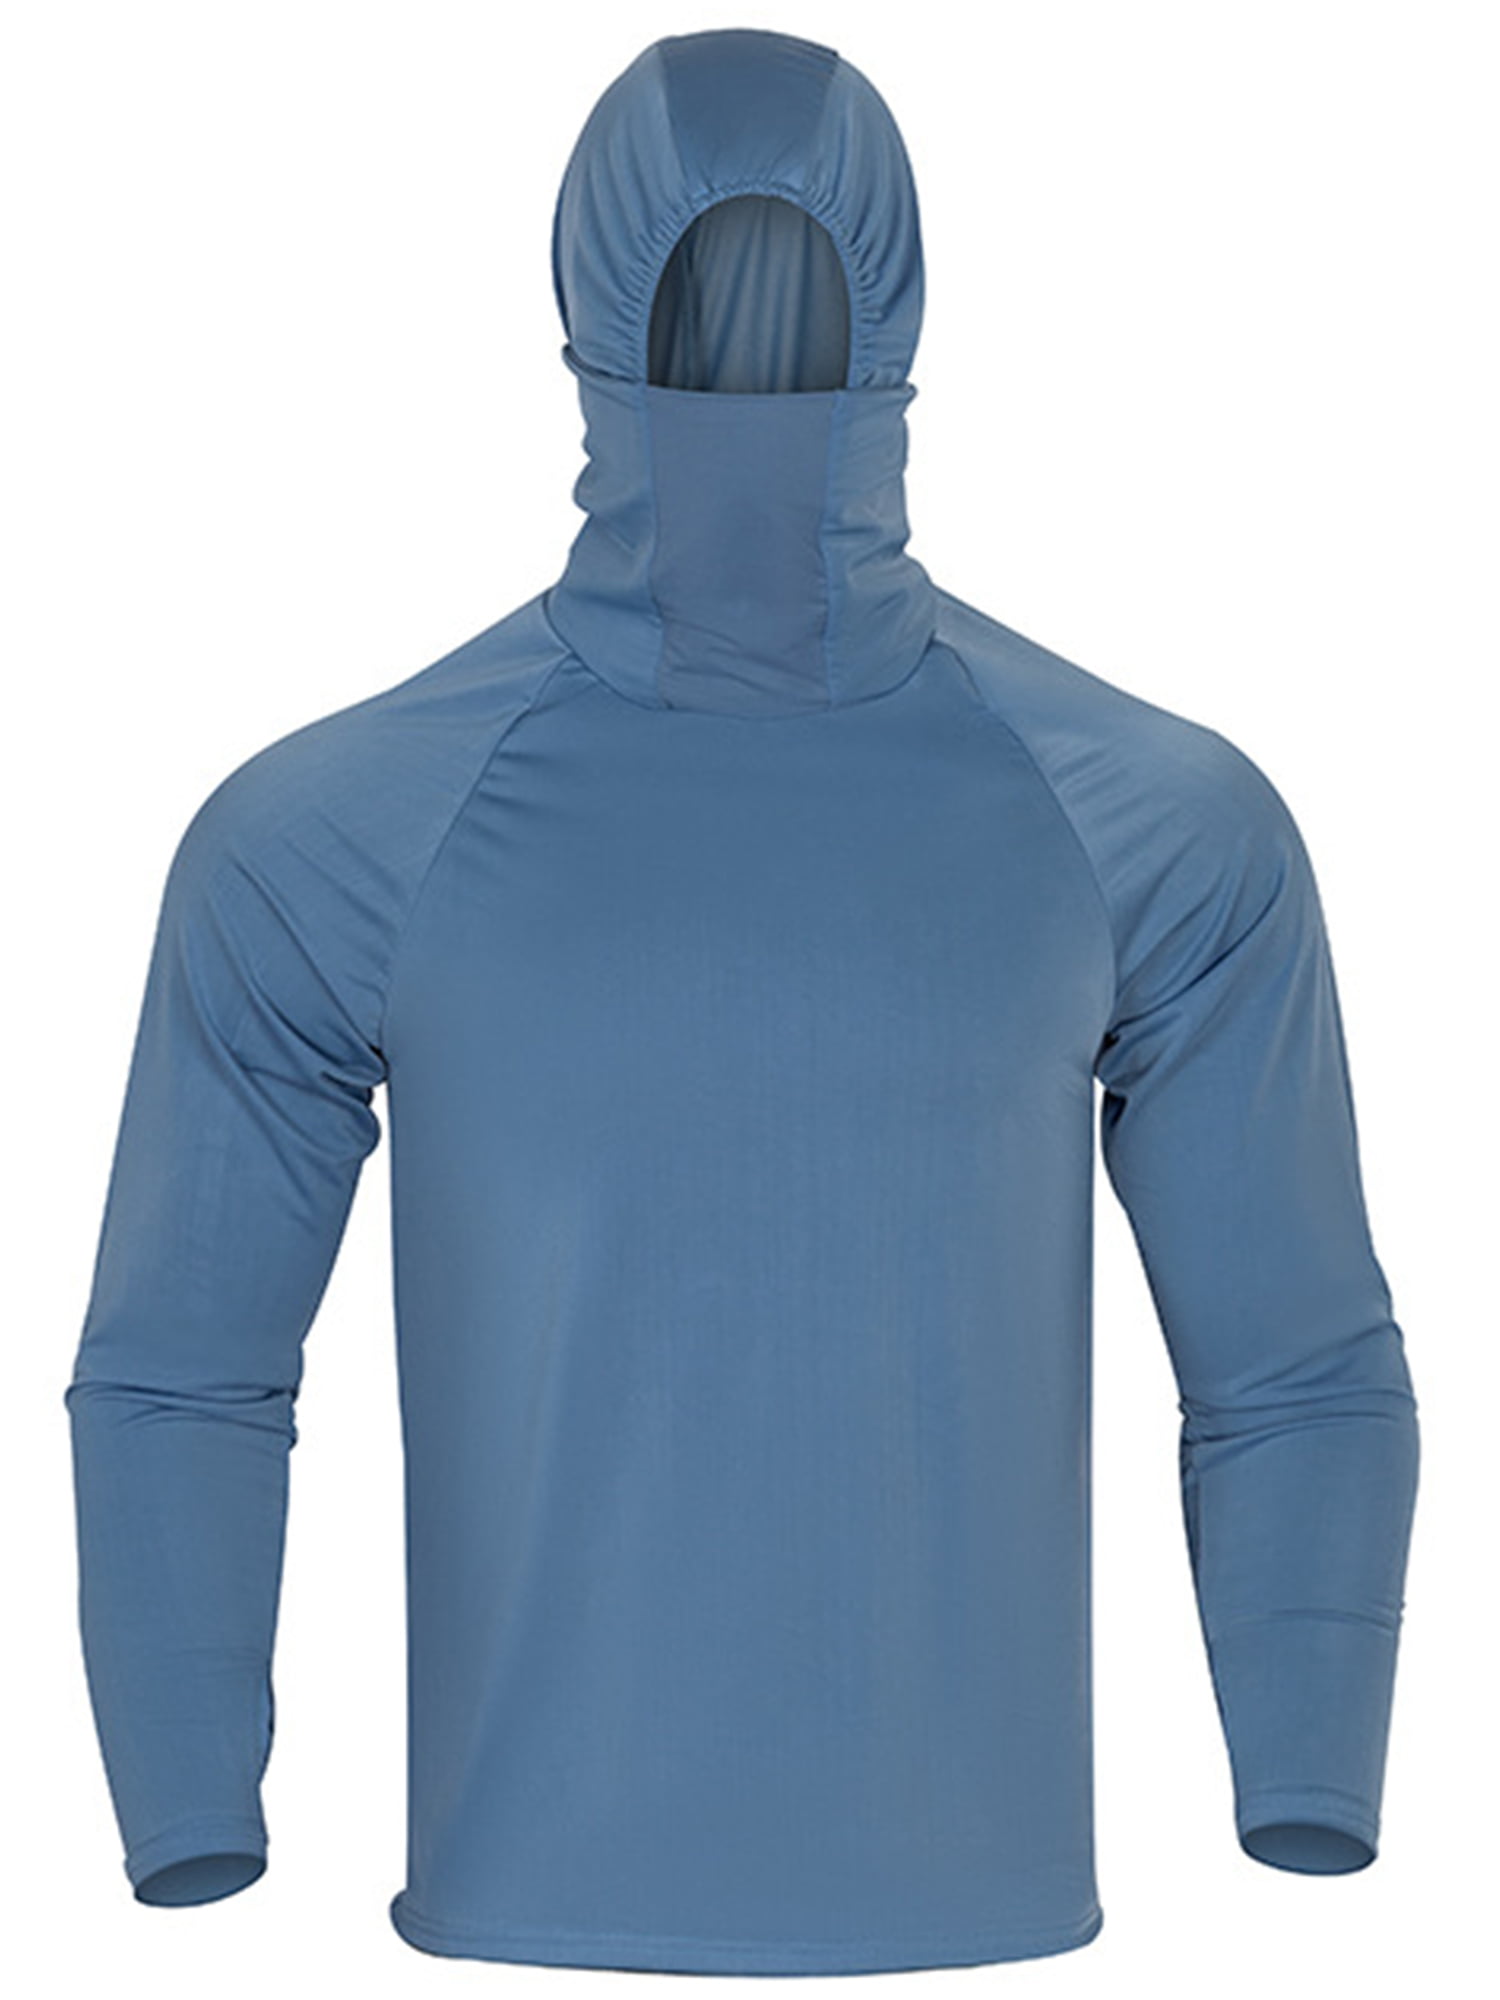 Hooded Helios Fishing Shirts with Gaiter Blue Zipcam / XL- Tall